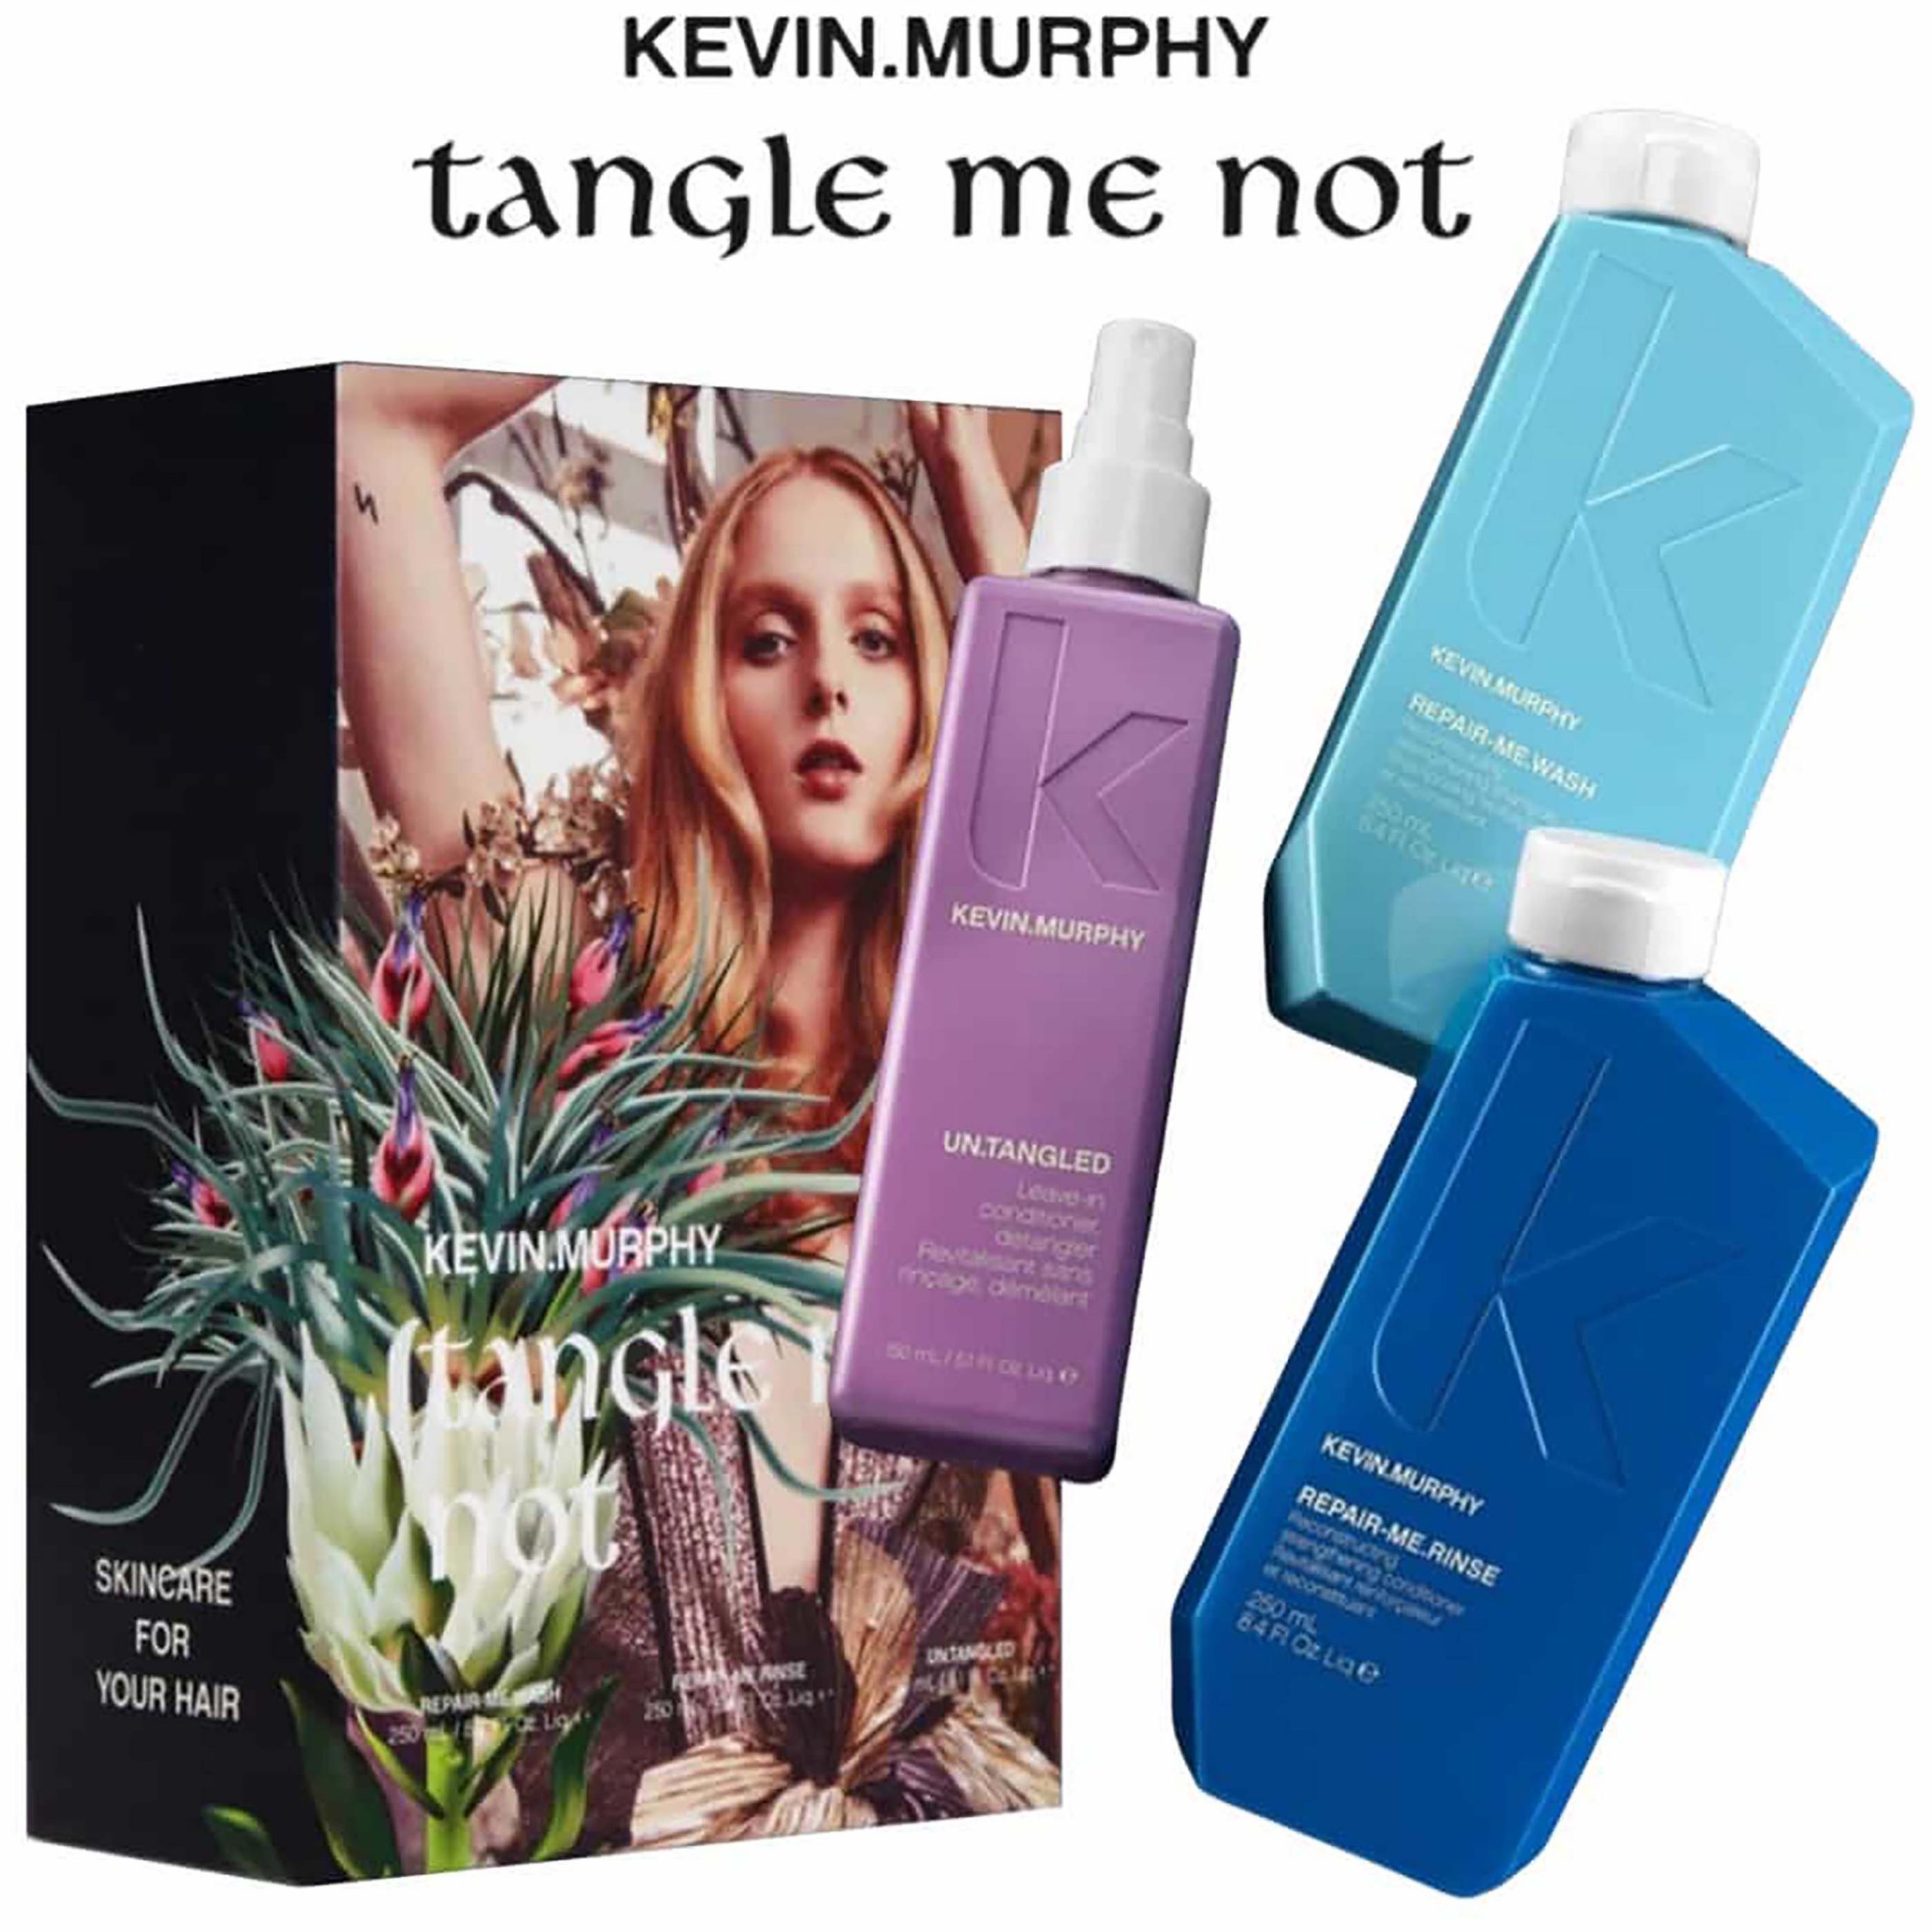 Kevin Murphy Tangle Me Knot Gift Set